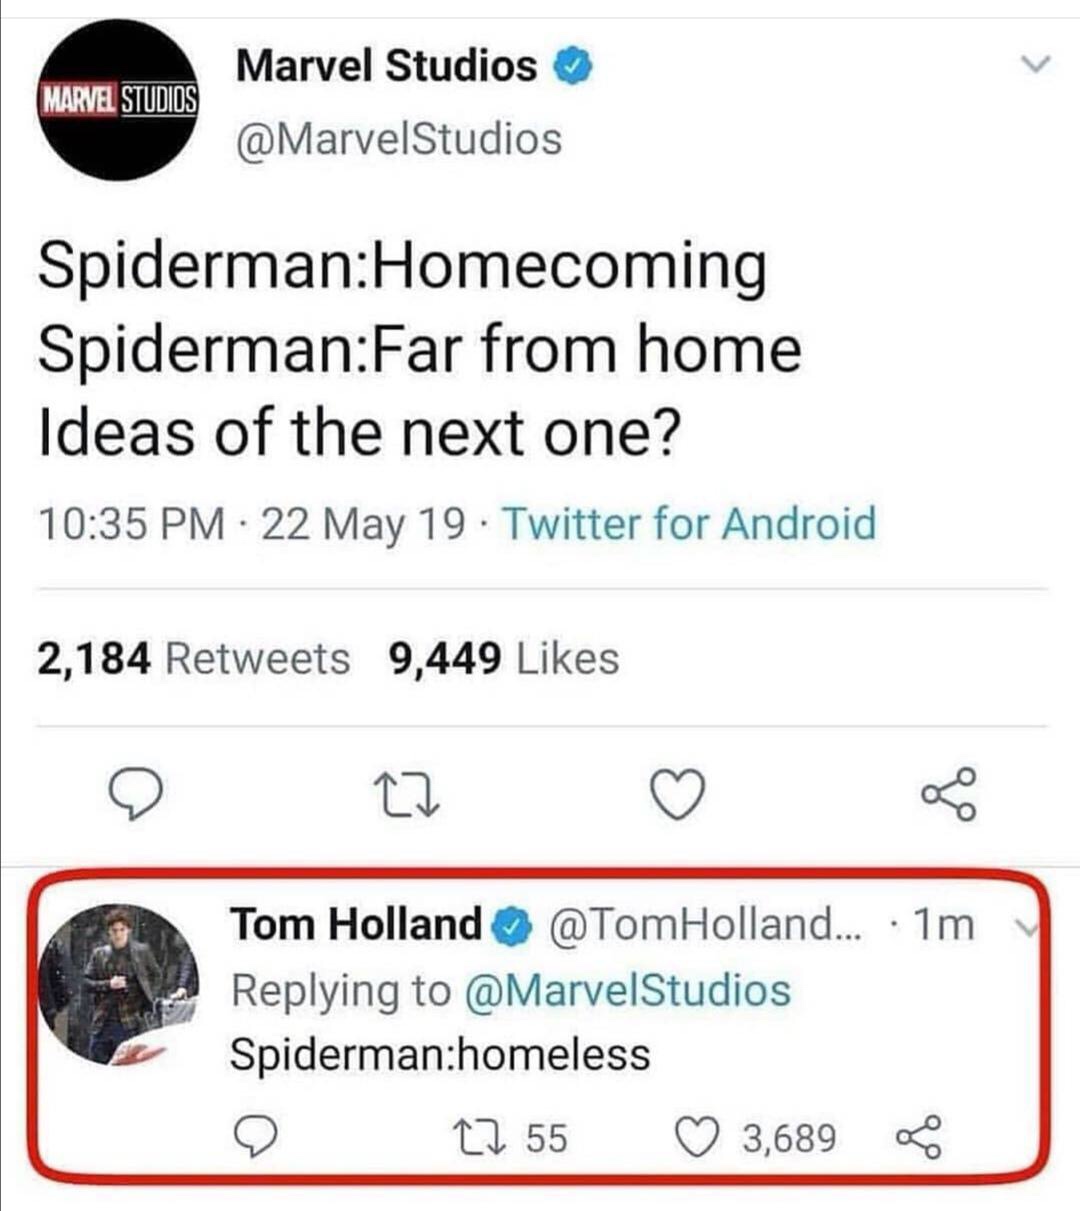 Marvel Studios Marvel Studios Studios SpidermanHomecoming SpidermanFar from home Ideas of the next one? 22 May 19. Twitter for Android 2,184 9,449 Tom Holland Holland... 1m Spidermanhomeless 55 3,689 38